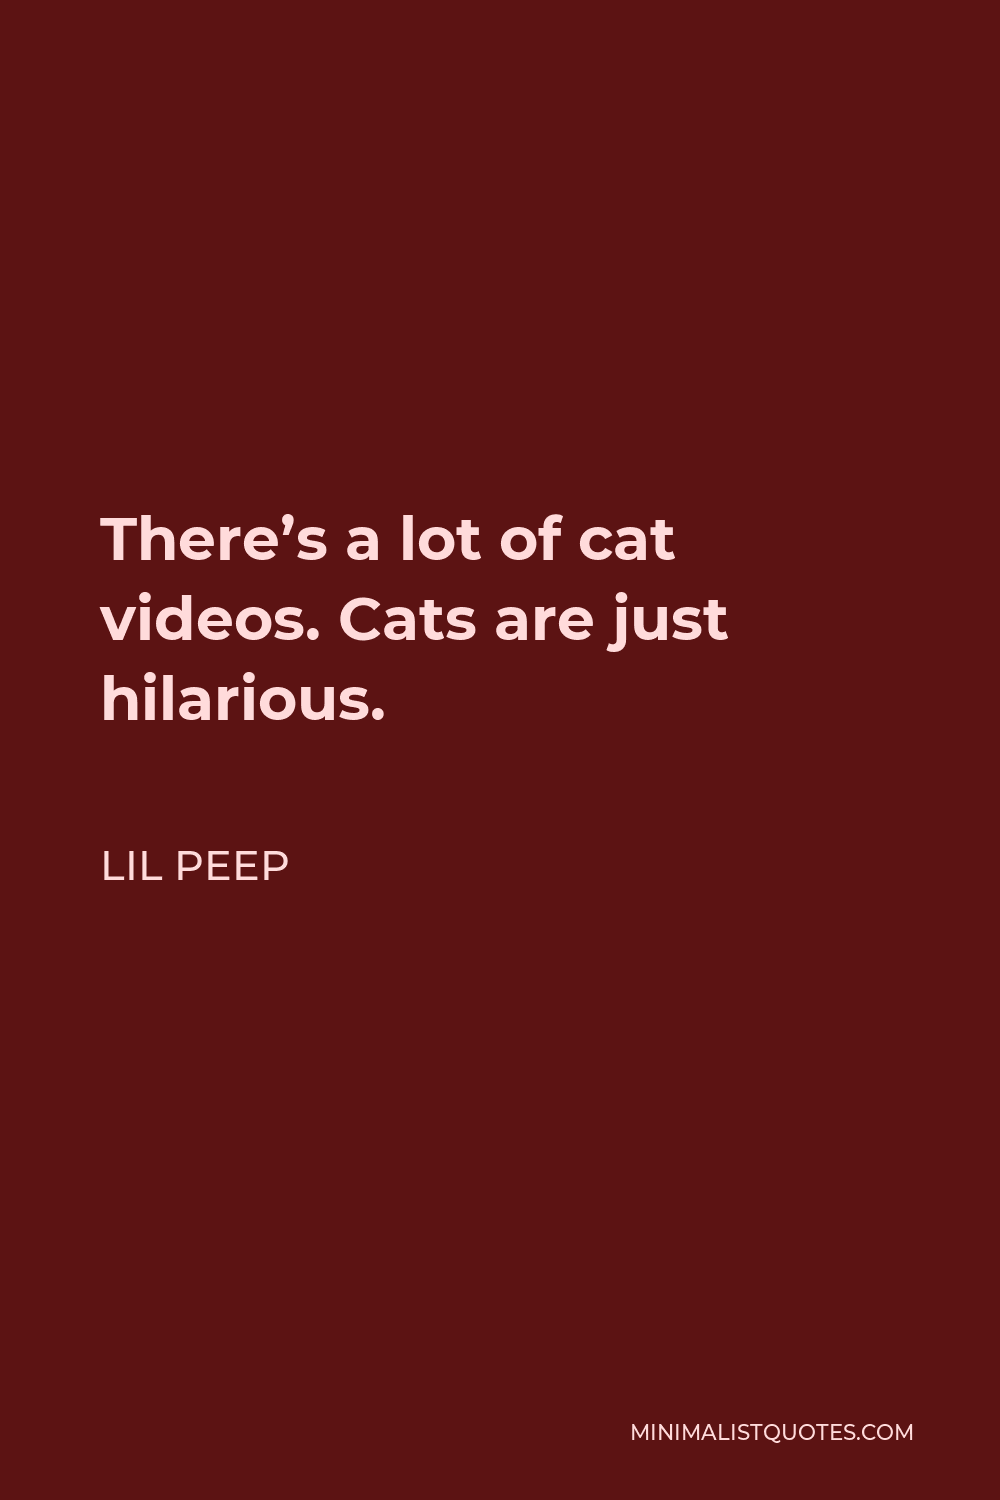 Lil Peep Quote - There’s a lot of cat videos. Cats are just hilarious.